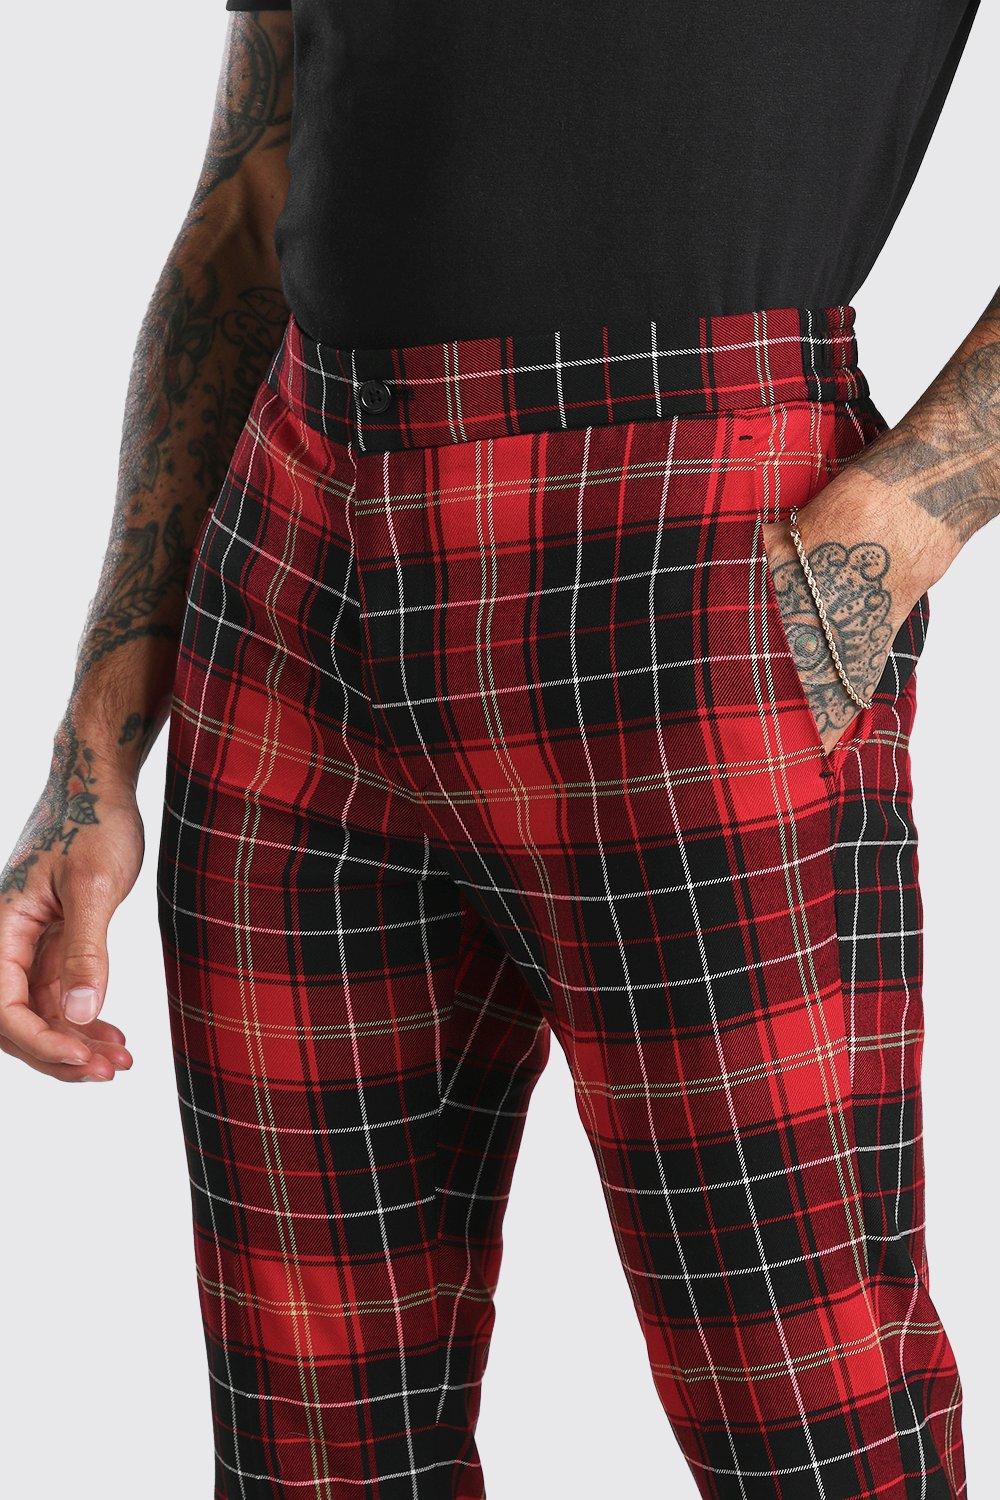 https://media.boohoo.com/i/boohoo/mzz20263_red_xl_3/male-red-skinny-red-plaid-cropped-smart-pants